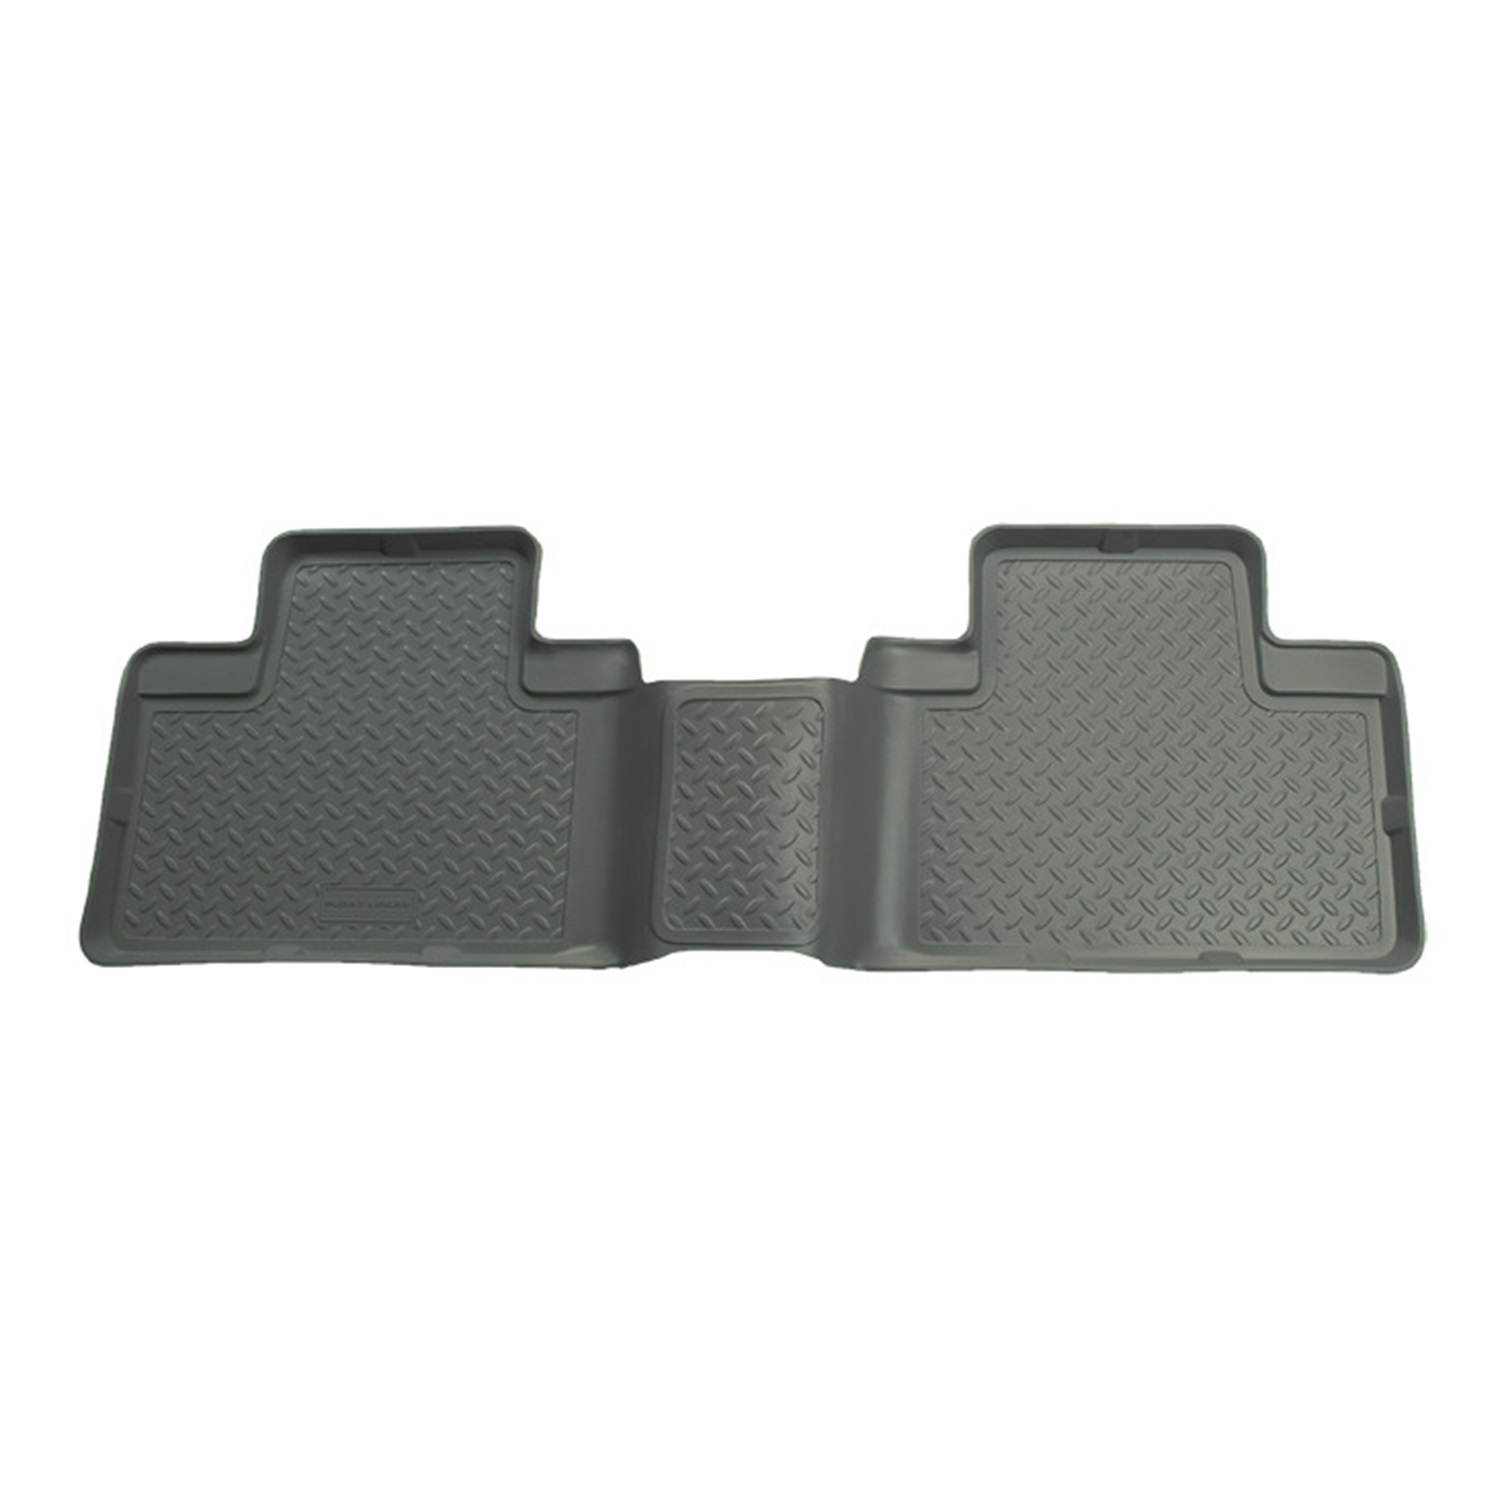 Husky Liners Husky Liners 73542 Classic Style; Floor Liner Fits 07-14 Expedition Navigator